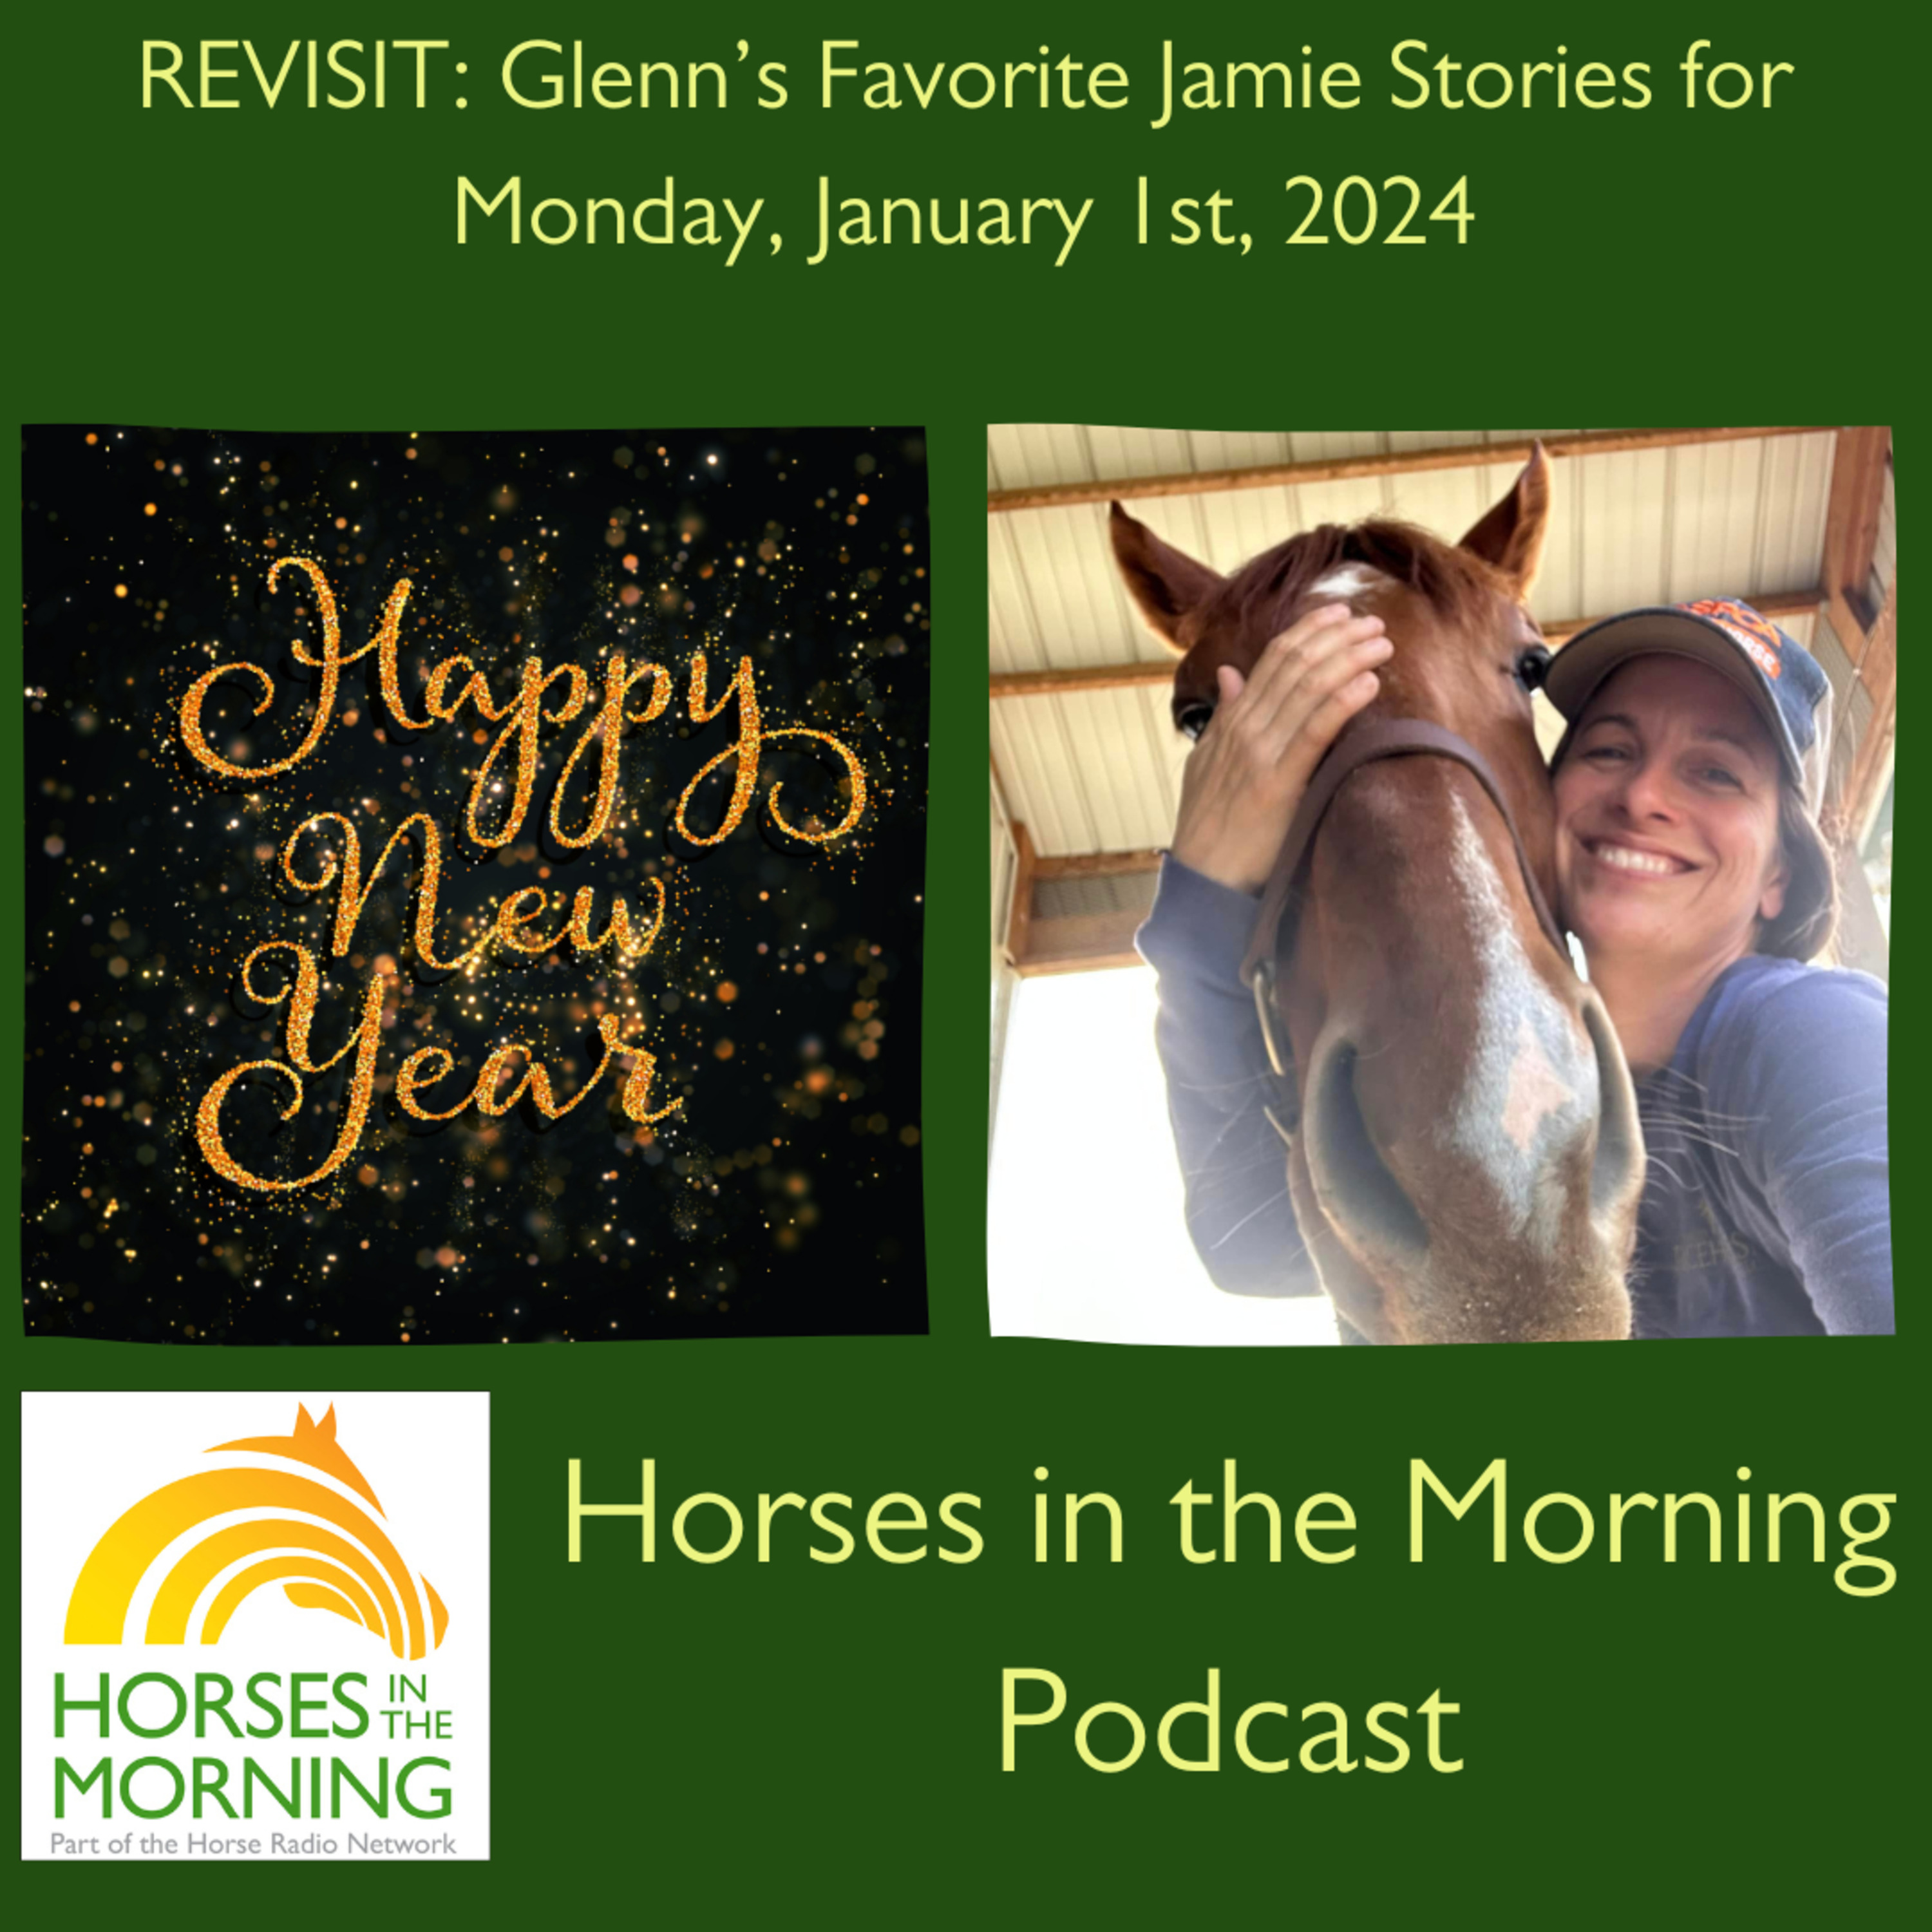 REVISIT: Glenn’s Favorite Jamie Stories for Monday, January 1st, 2024 by WERM Flooring – HORSES IN THE MORNING